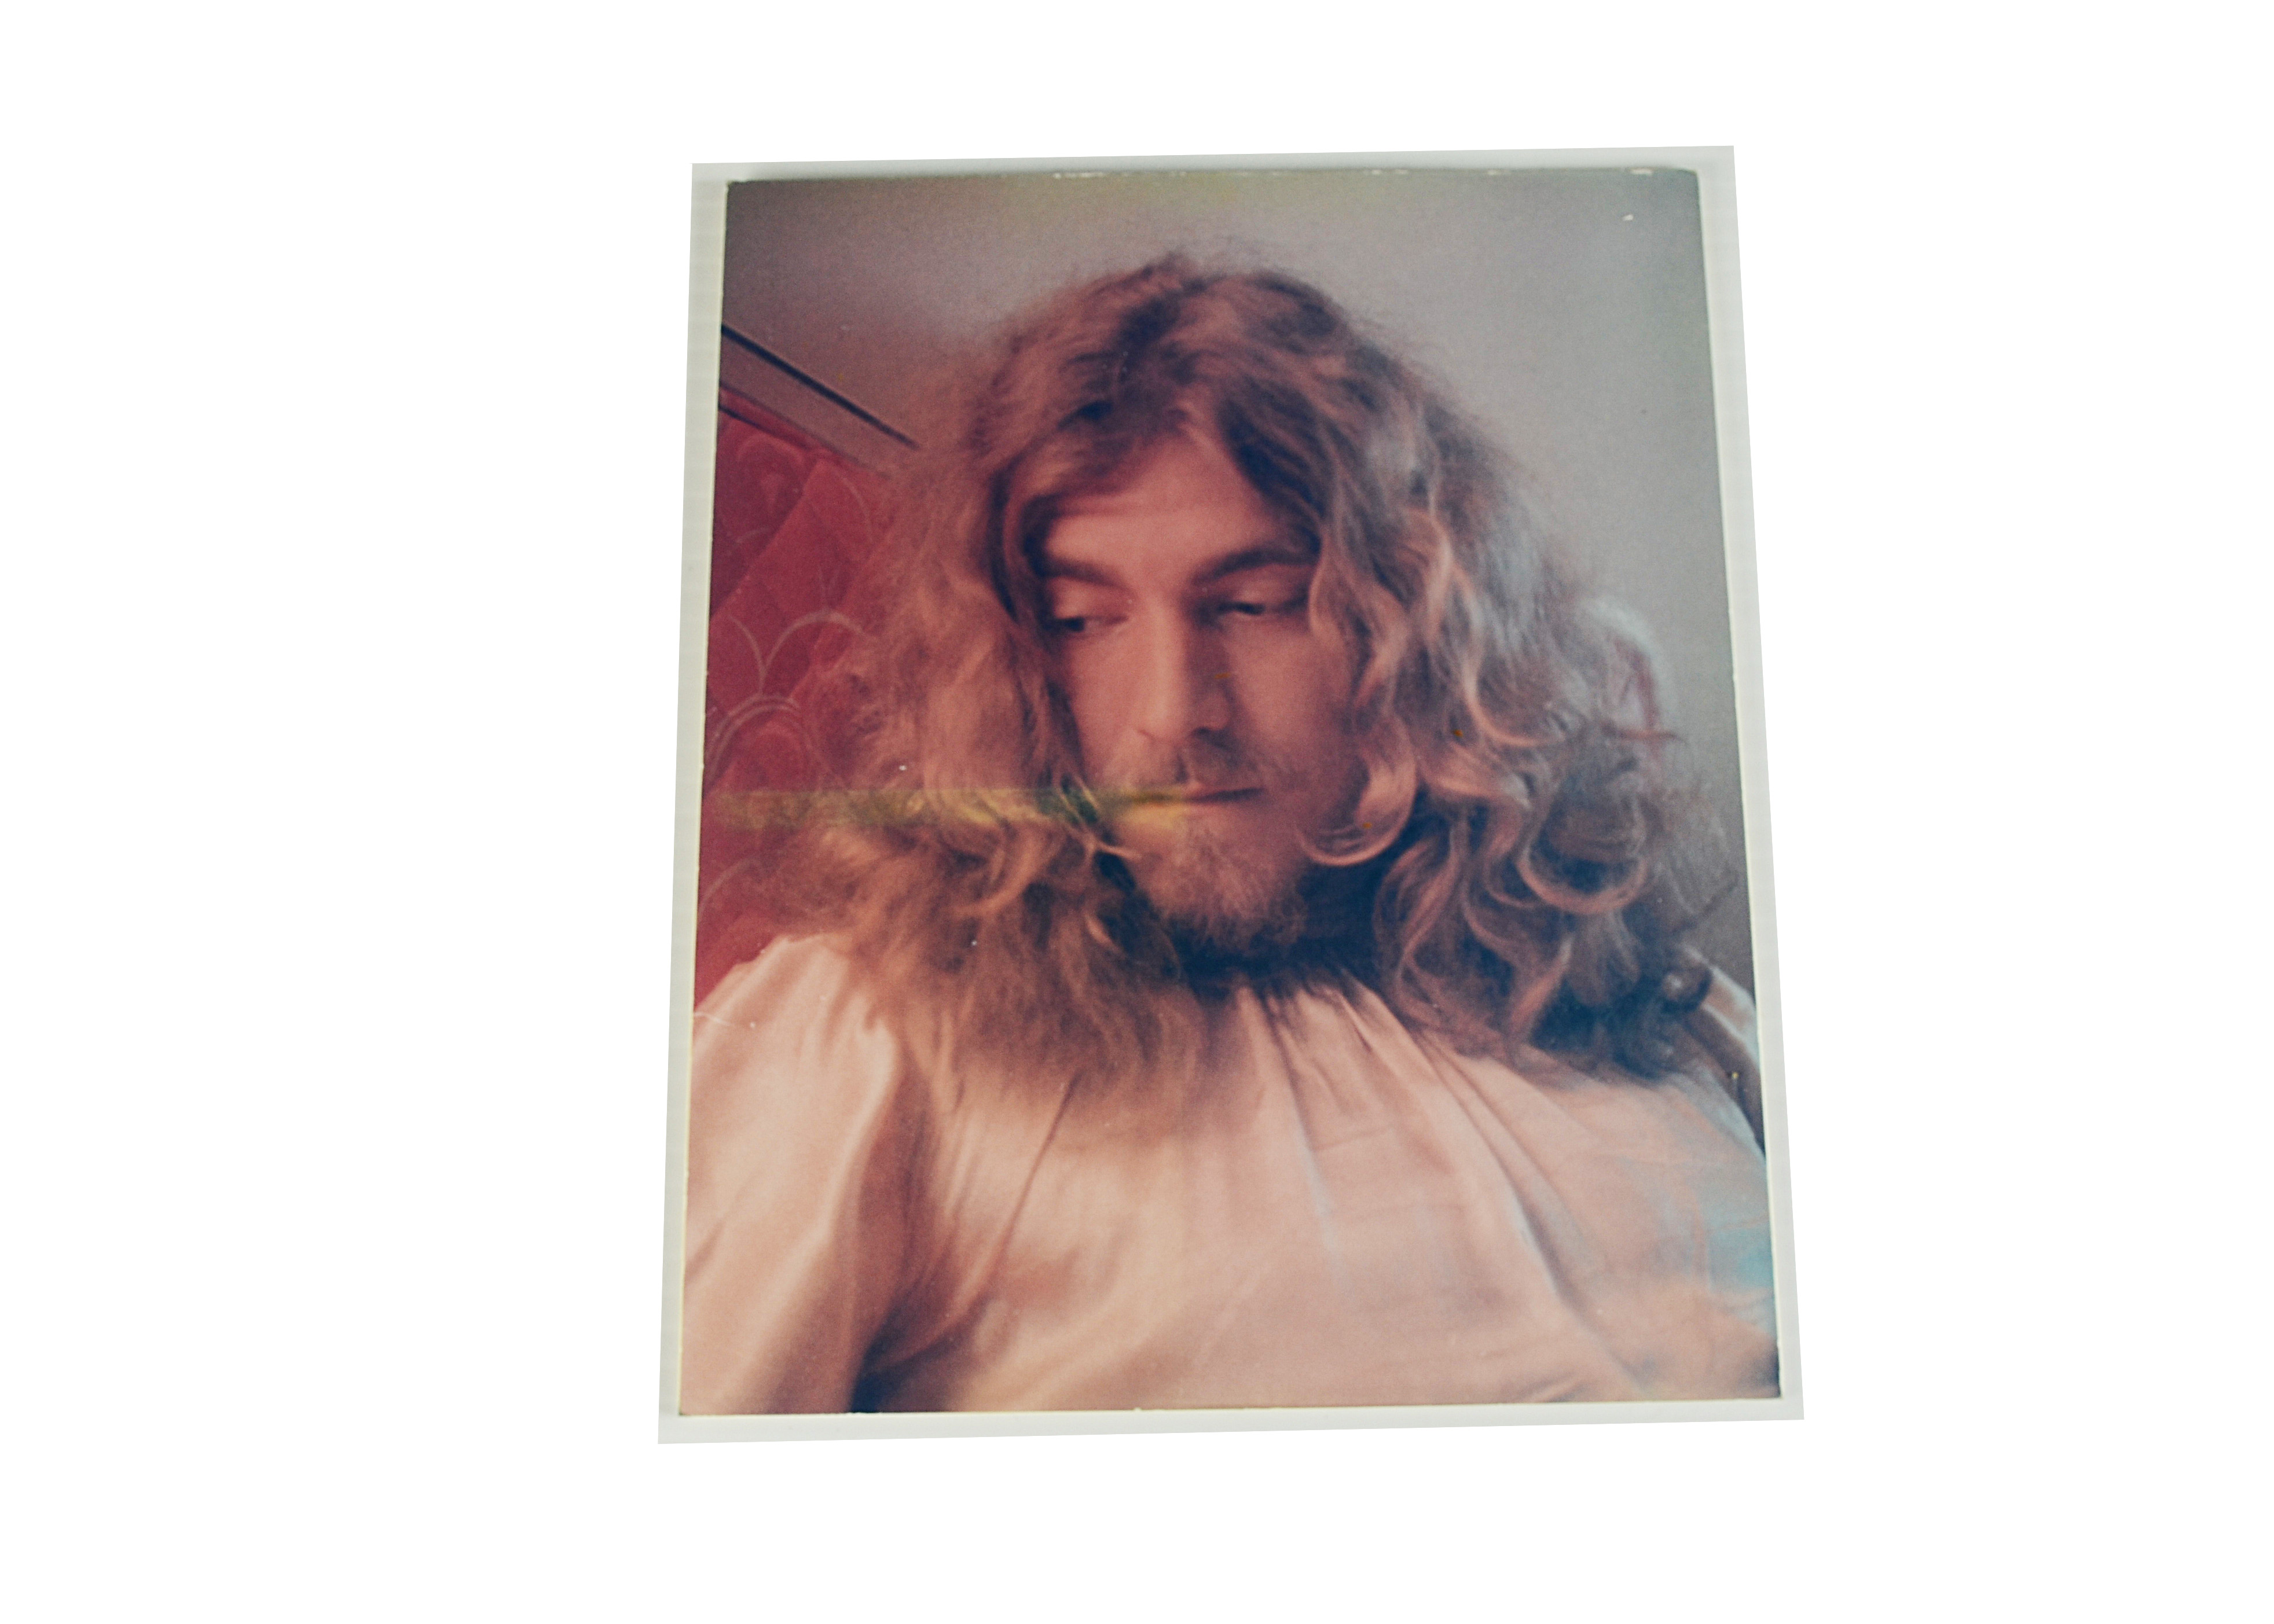 Led Zeppelin, five photographs believed to be contemporary silver gelatine prints from the period - Image 6 of 6